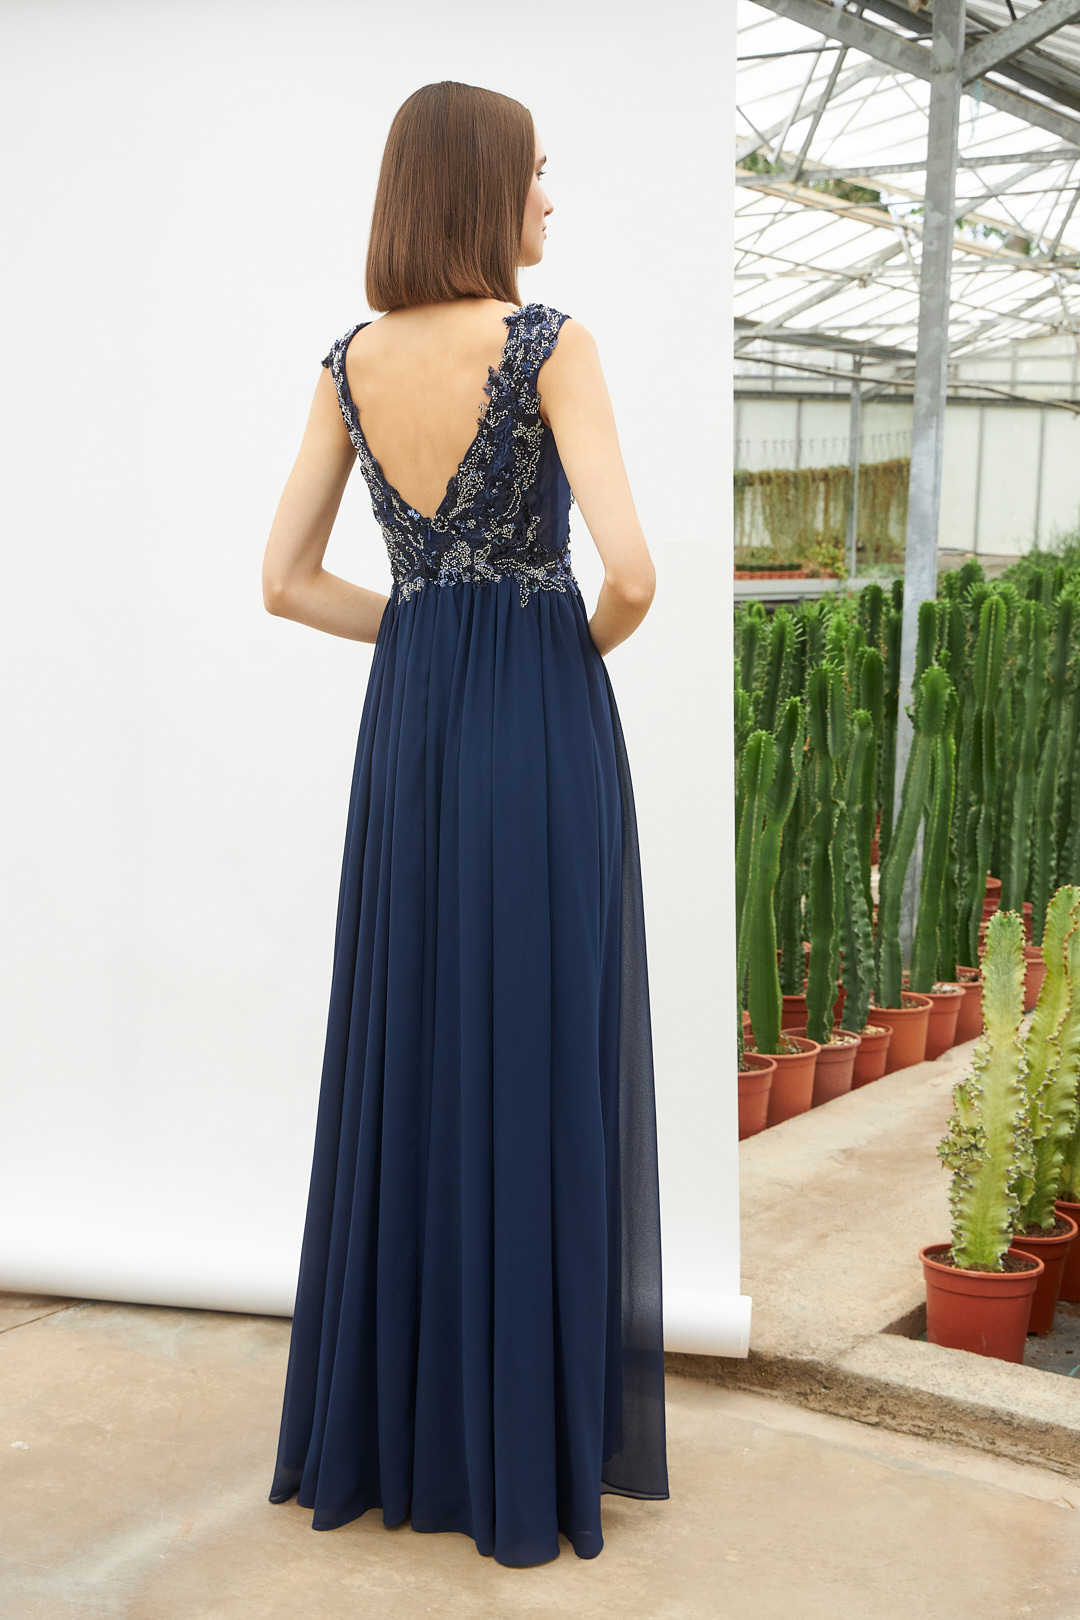 Классические платья / Long classic dresss with fuly beaded top and wide straps